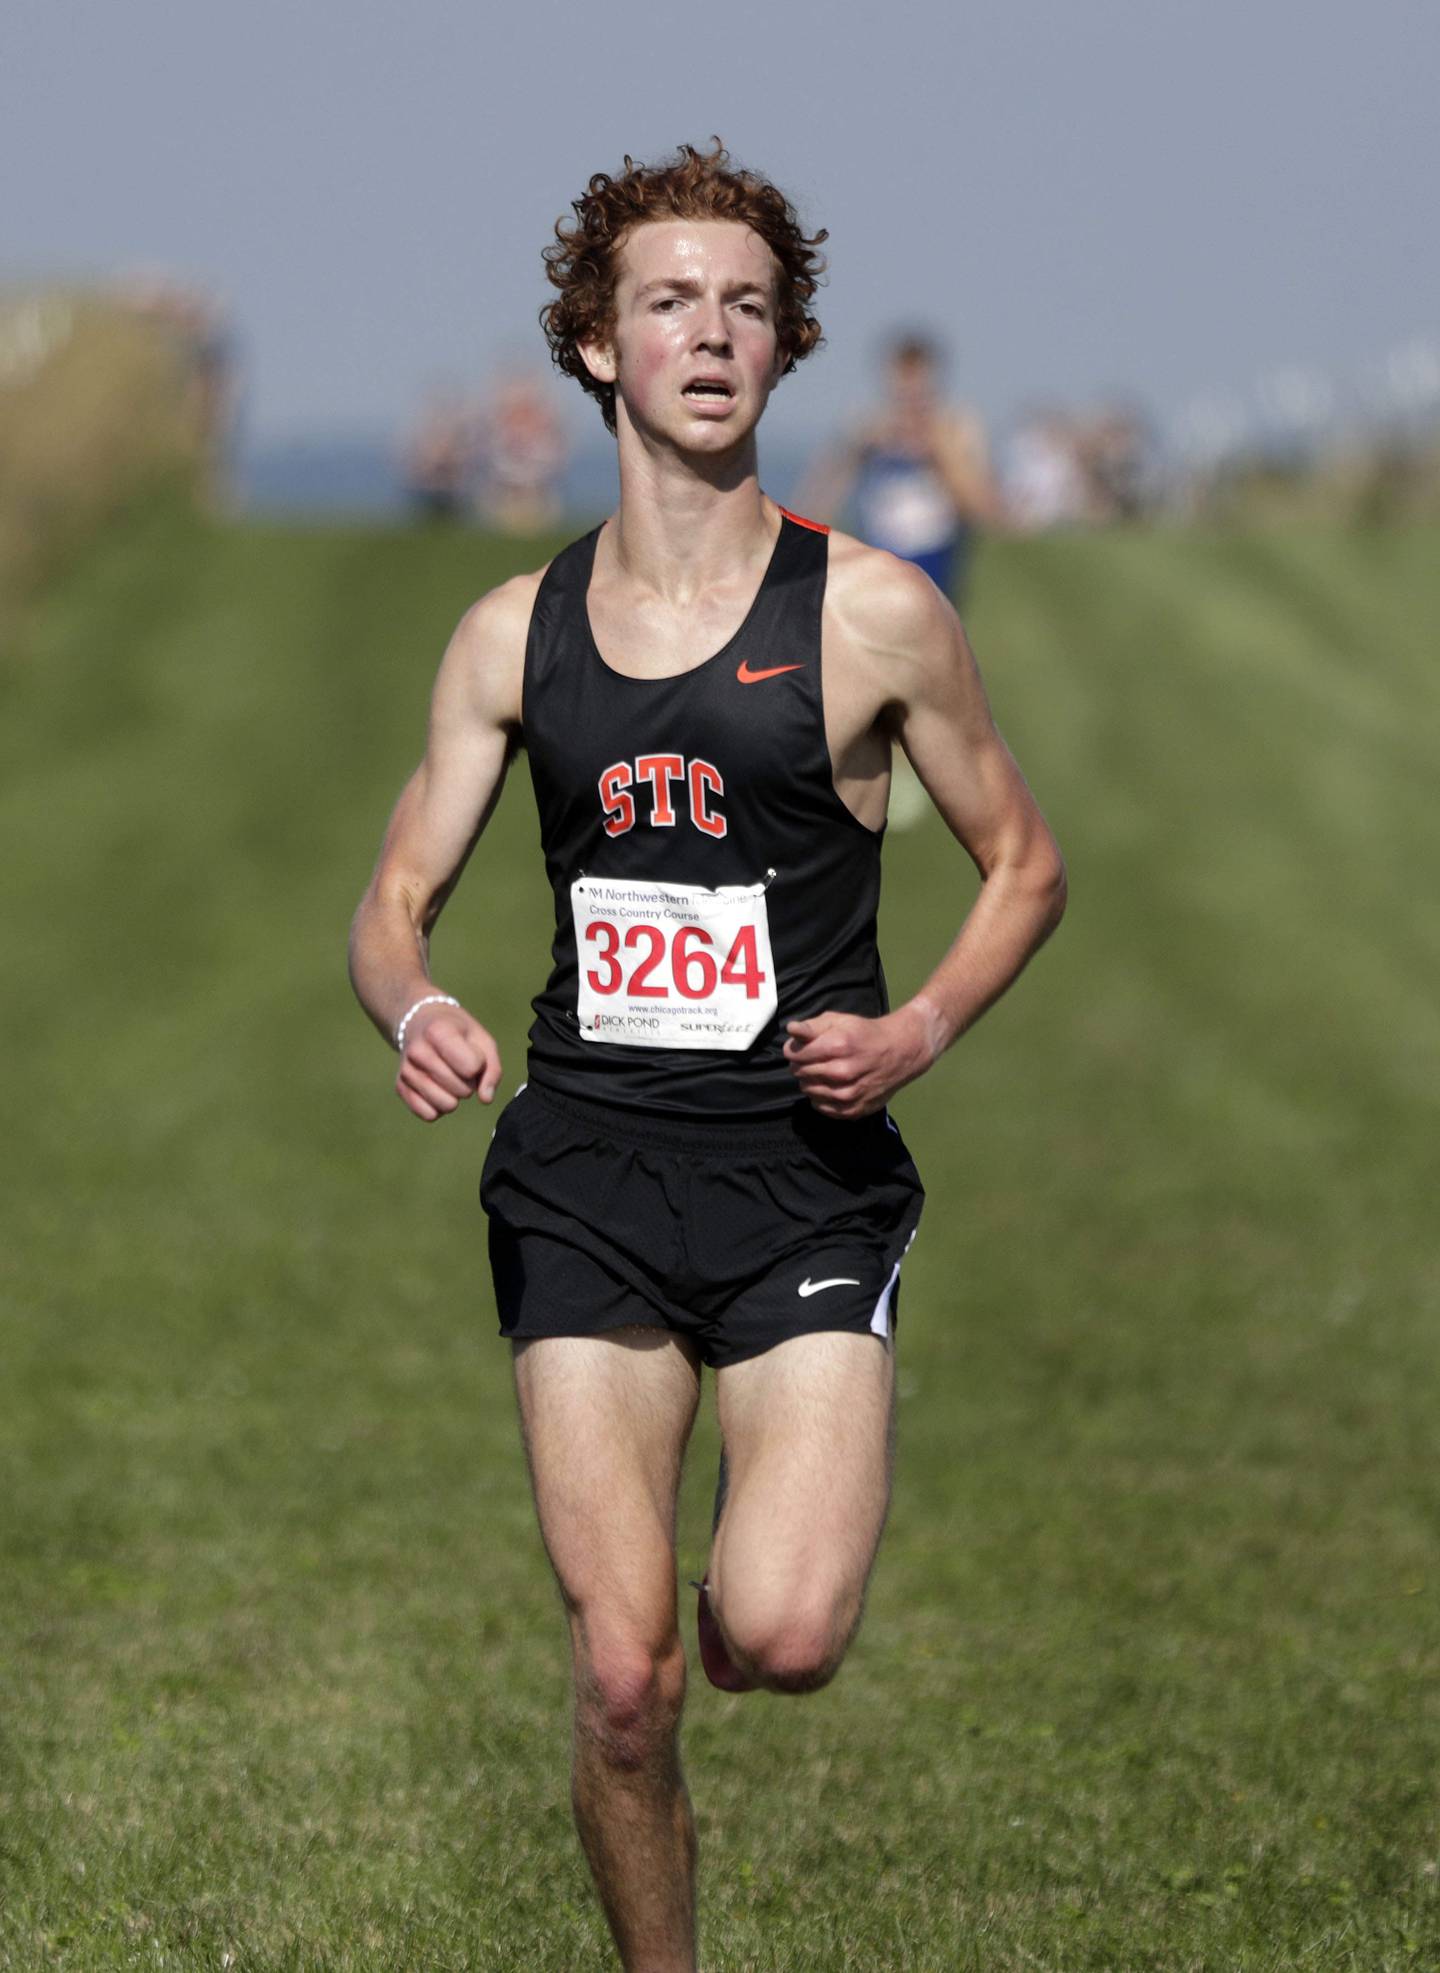 St. Charles East's Mitch Garcia at the Kane County cross country meet Saturday August 27, 2022 at Northwestern Medicine Field in Geneva.